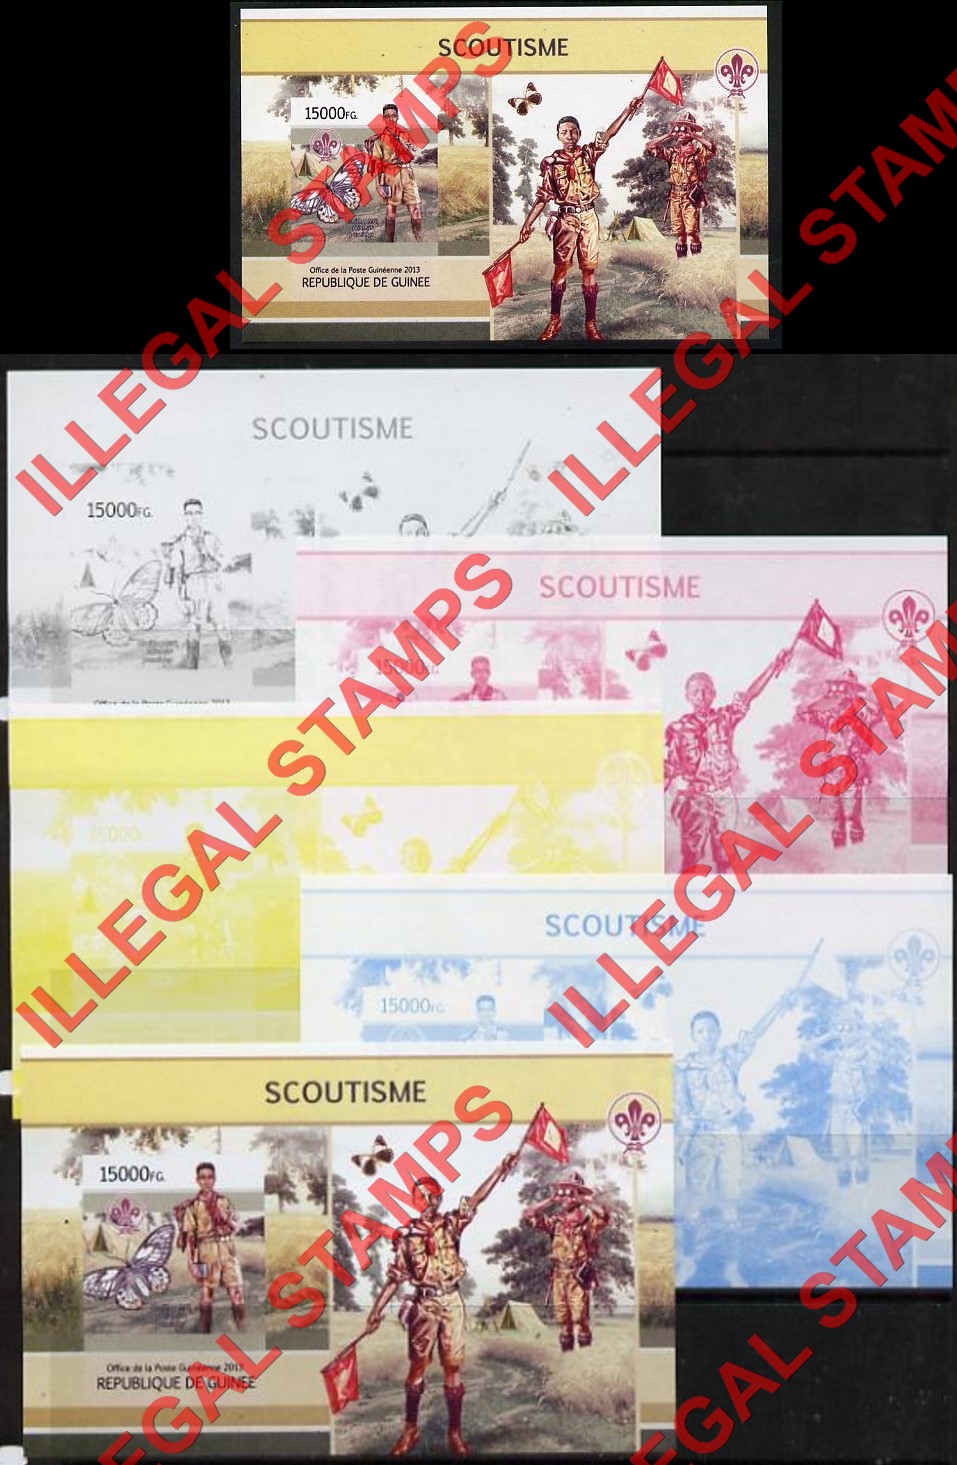 Guinea Republic 2013 Scouting Scoutisme Counterfeit Illegal Stamp with Matching Color Proofs (Set 2)